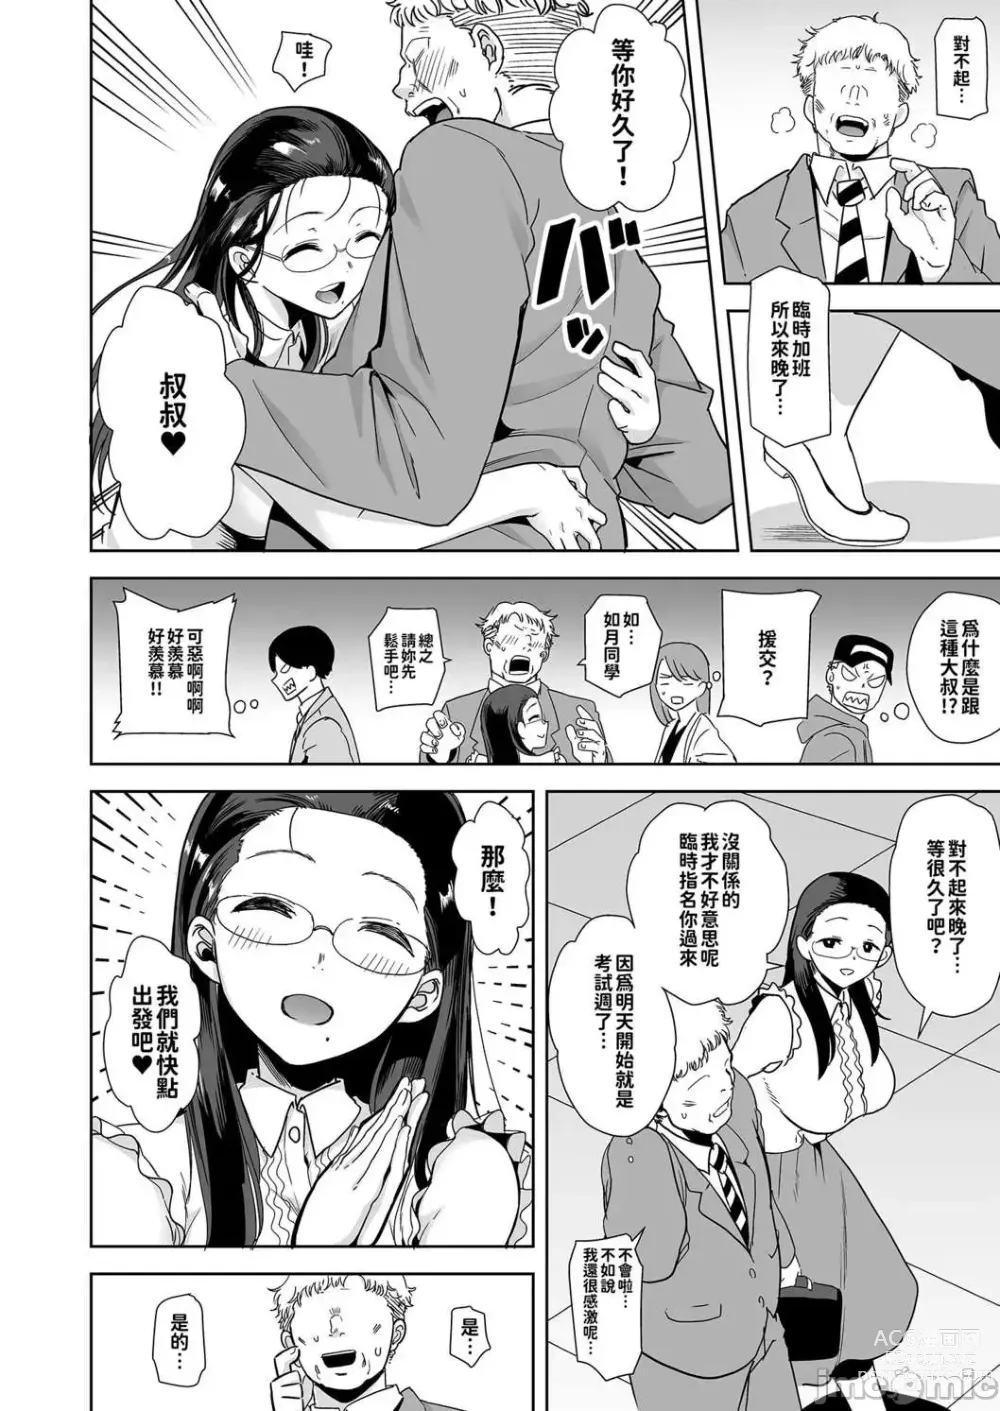 Page 3 of doujinshi Seika Girls Academys Officially Approved Prostitute Man 1 + 2